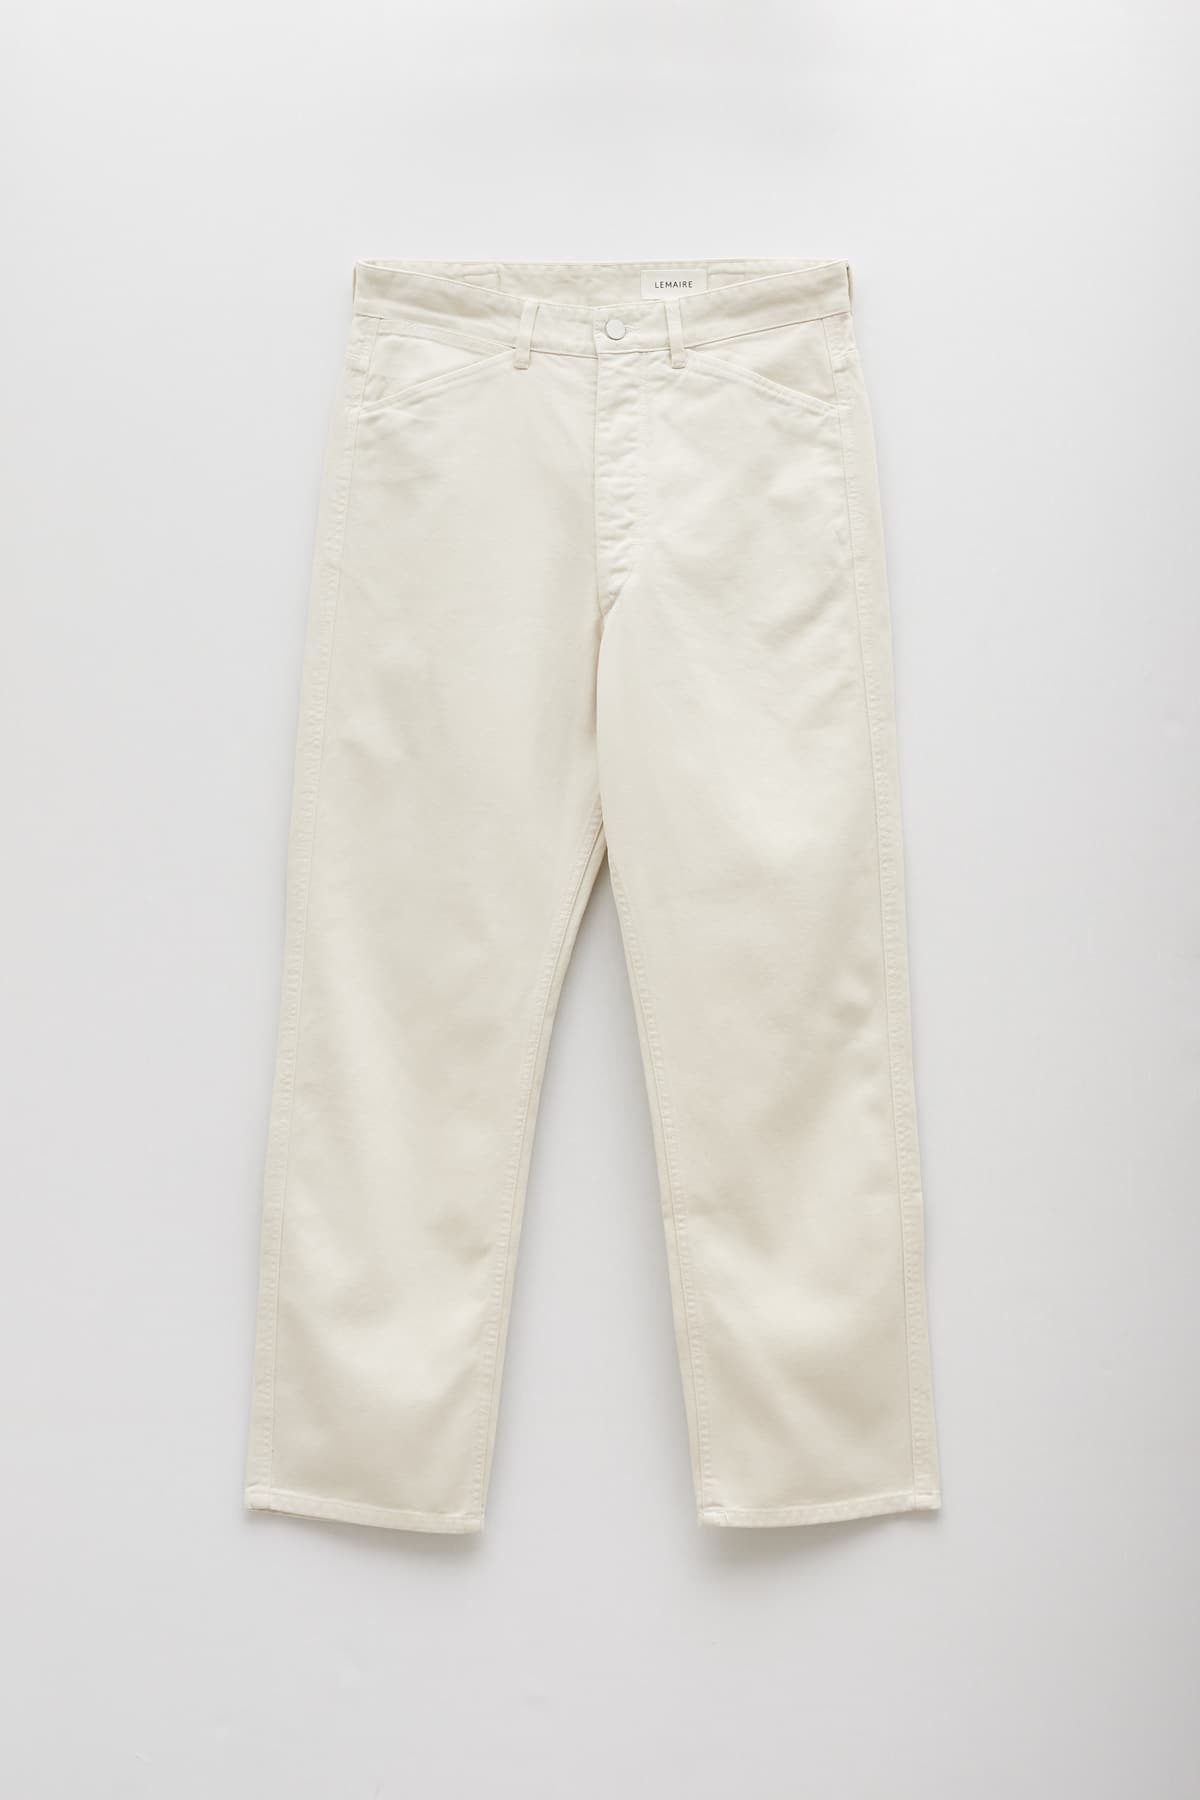 https://iamnue.com/5612-large_default/lemaire-clay-white-curved-5-pockets-pants.jpg